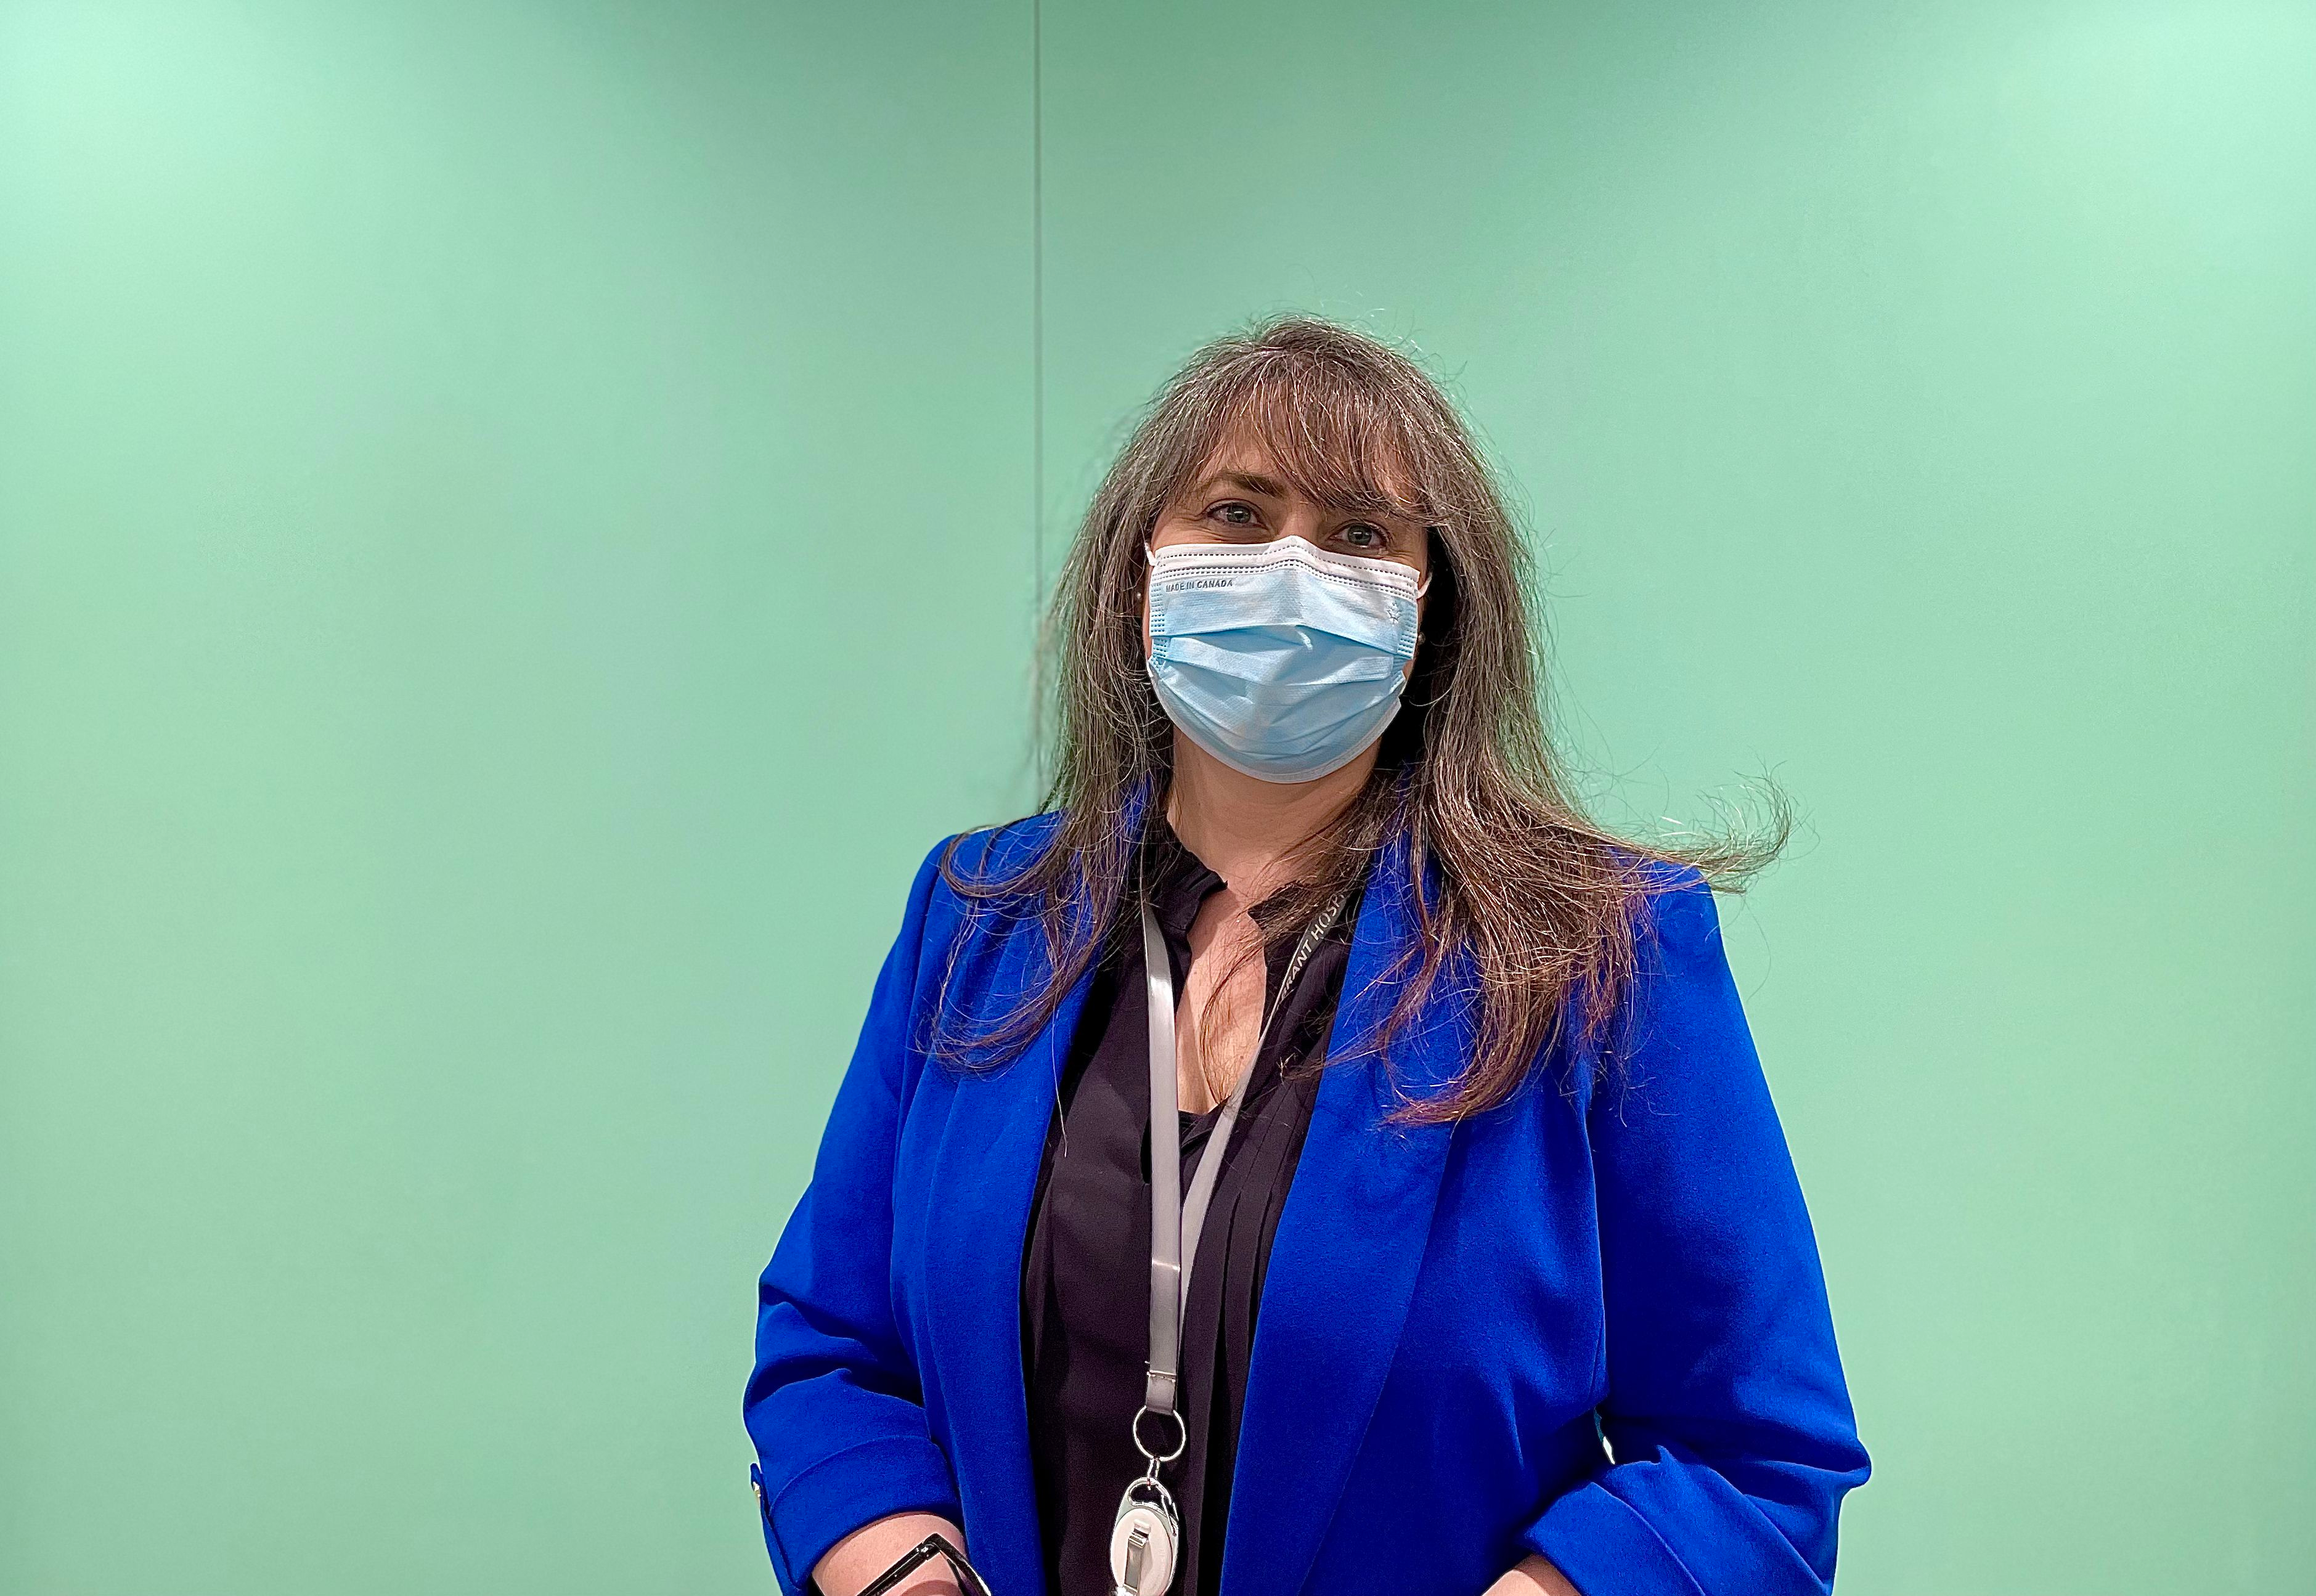 Anastasia Taylor standing in front of light blue wall wearing a dark blue blazer, black shirt and mask over her face.